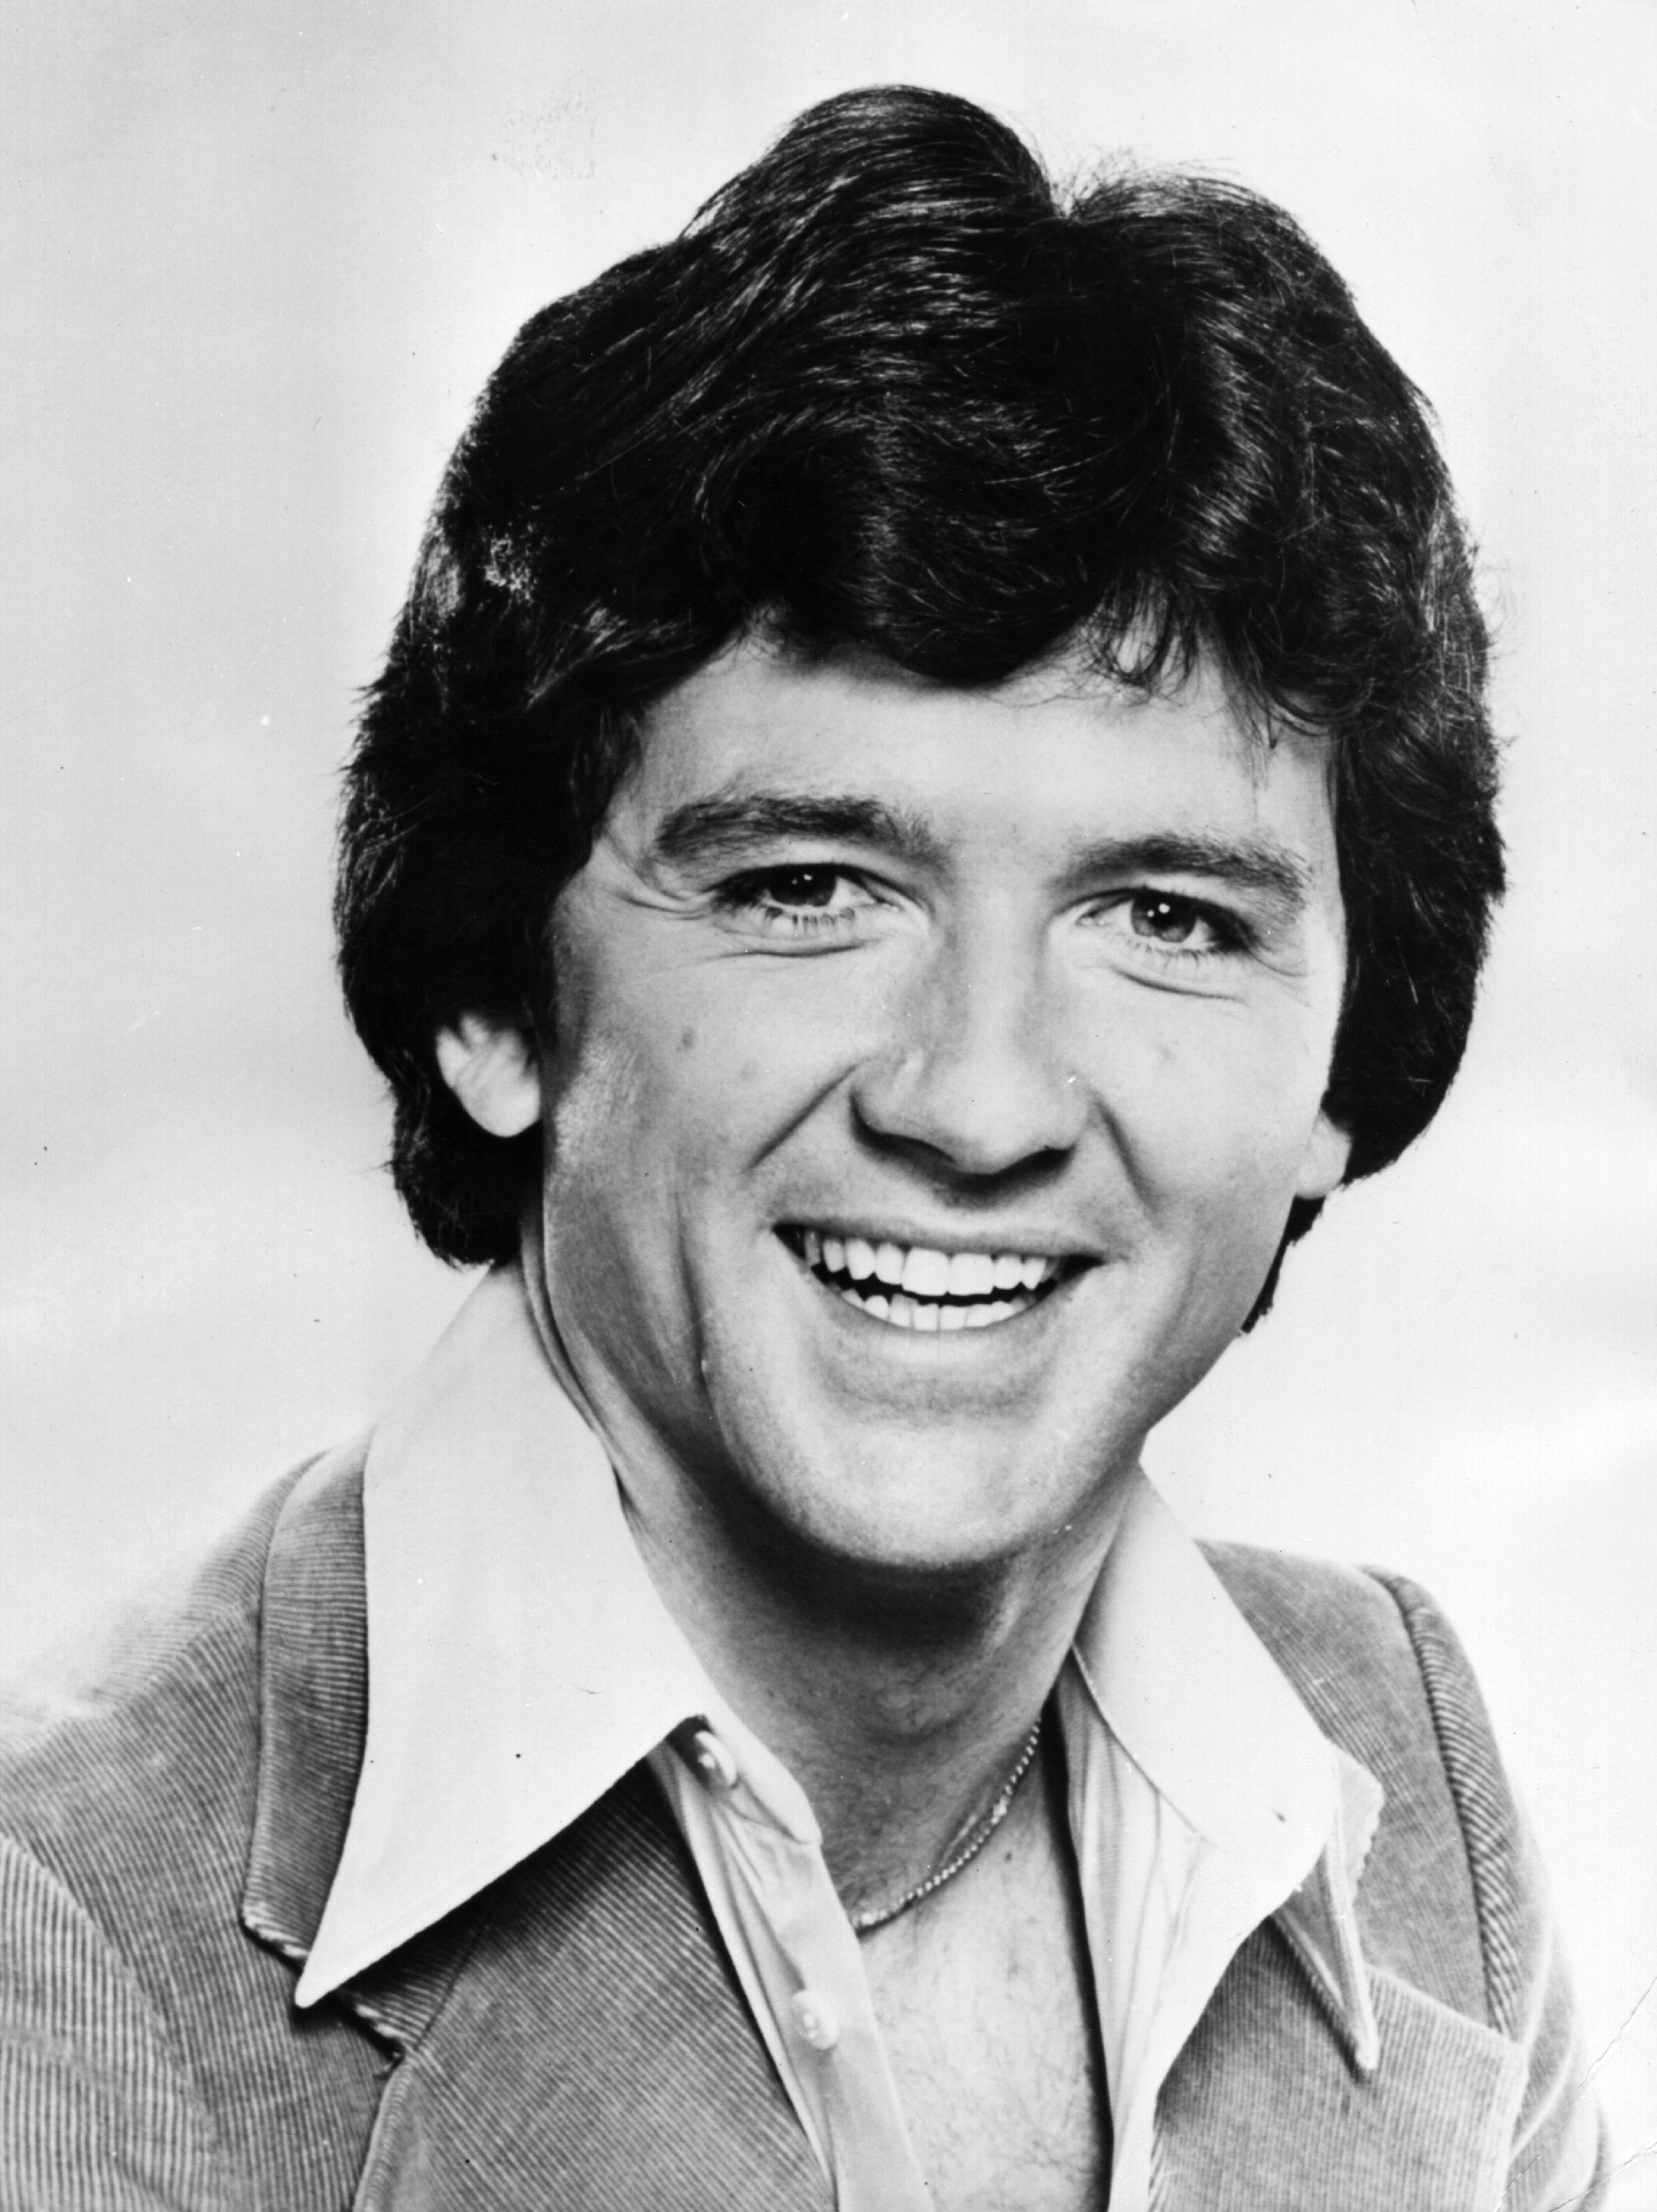 Portrait of Patrick Duffy in 1980 | Source: Getty Images